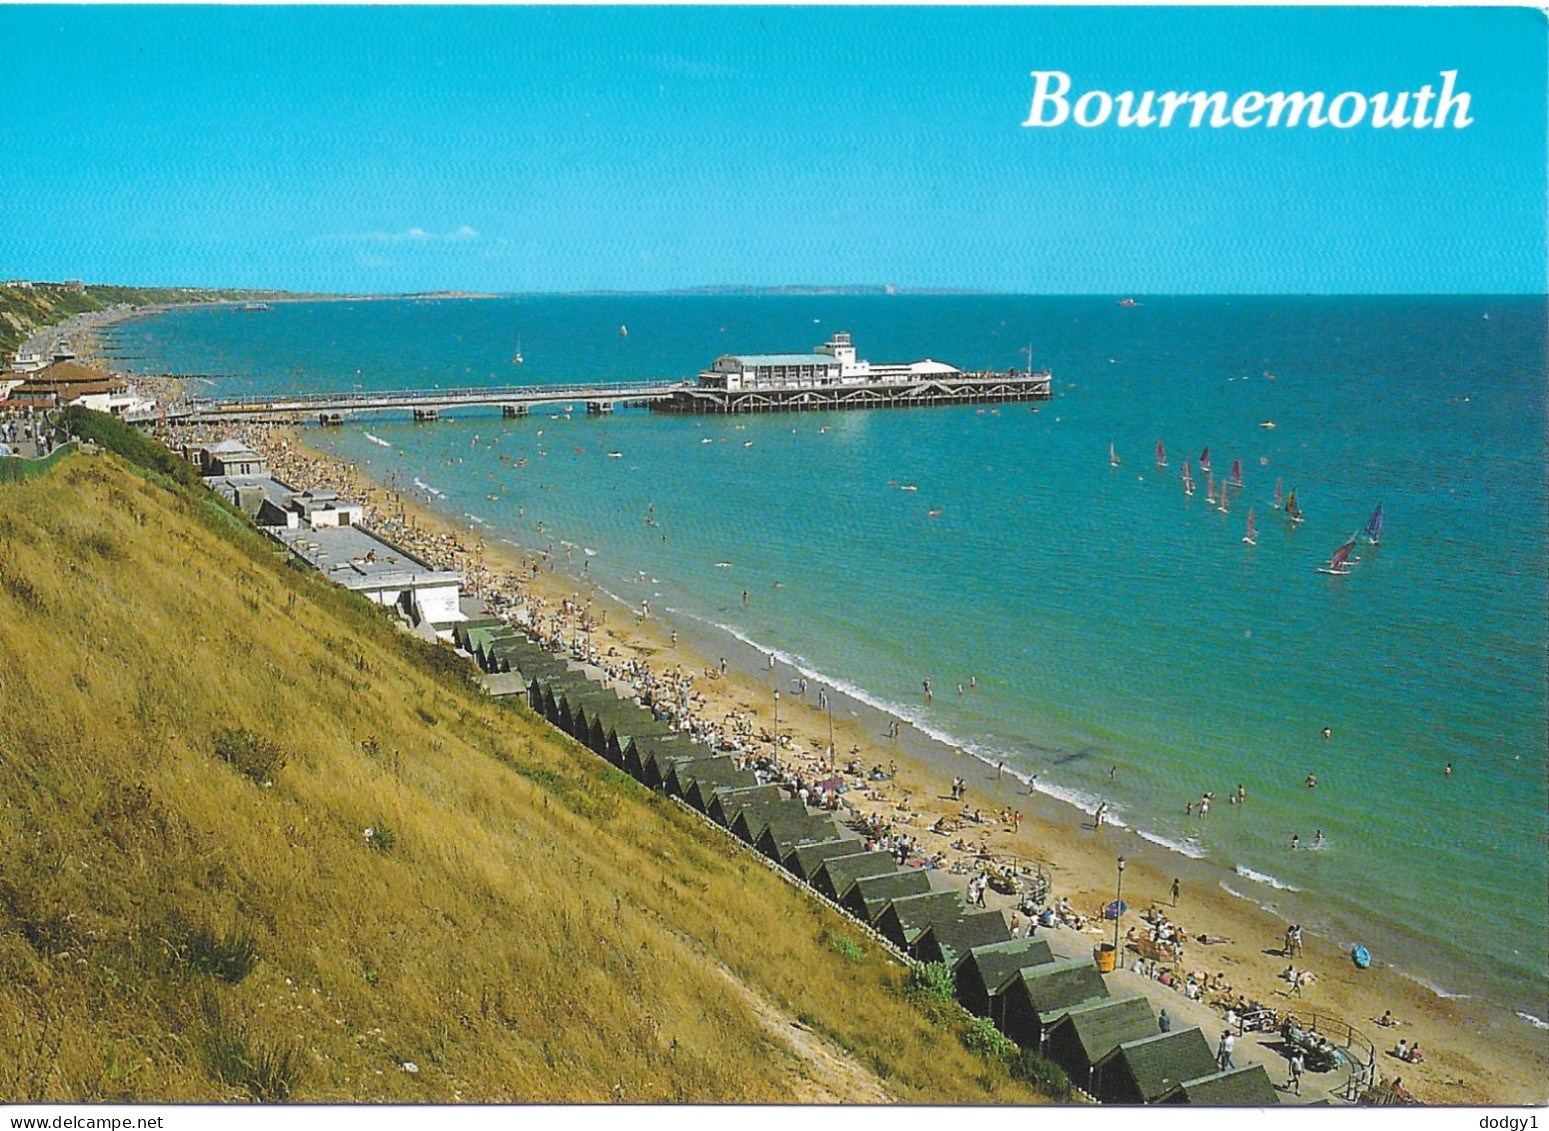 THE BEACH AND PIER, BOURNEMOUTH, DORSET, ENGLAND. UNUSED POSTCARD   Zf8 - Bournemouth (a Partire Dal 1972)